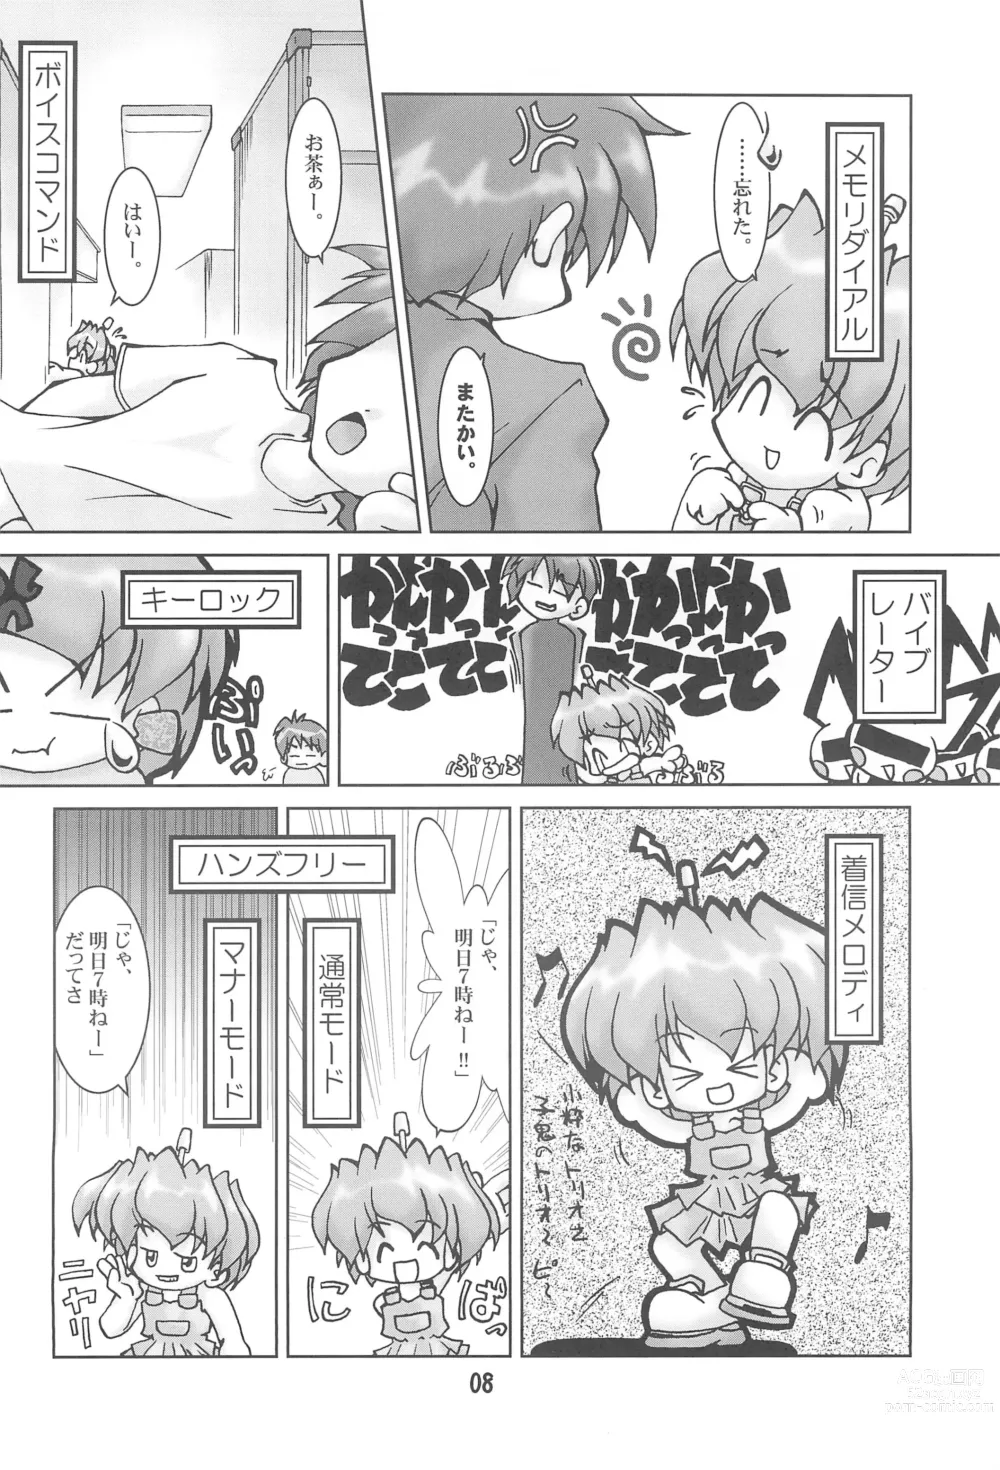 Page 10 of doujinshi POPPET-2